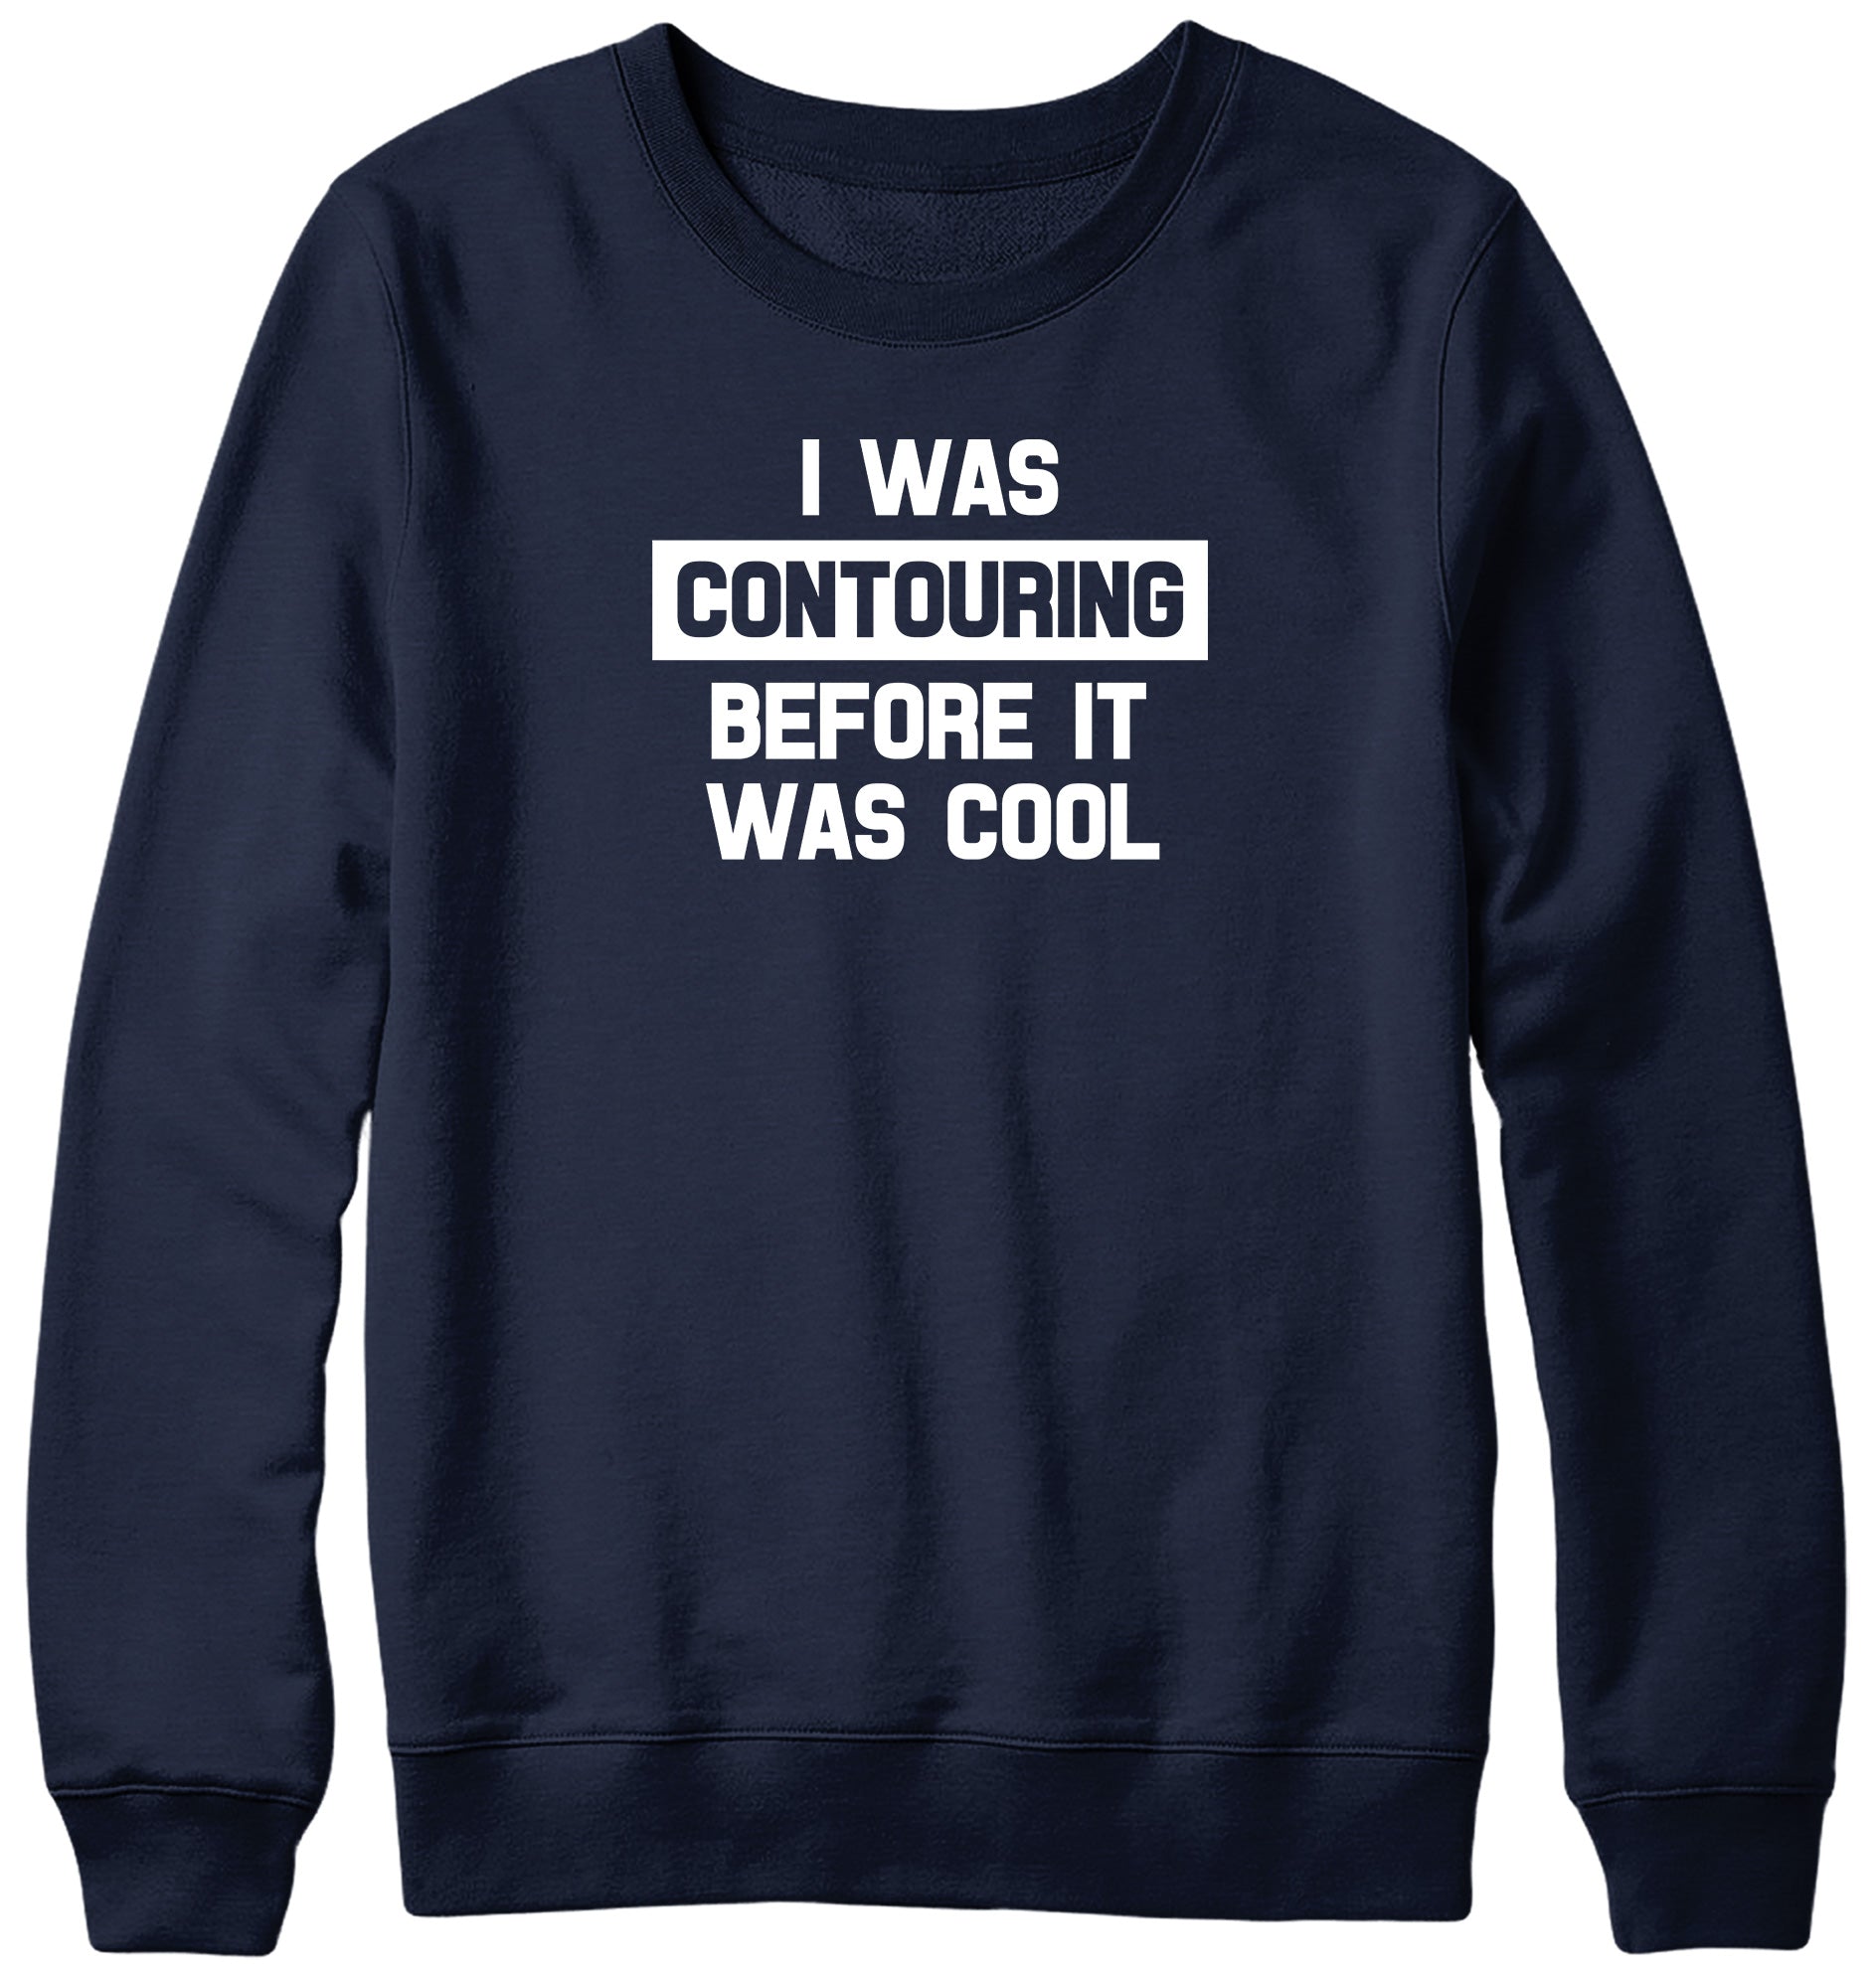 I WAS CONTOURING BEFORE IT WAS COOL WOMENS LADIES MENS UNISEX SWEATSHIRT